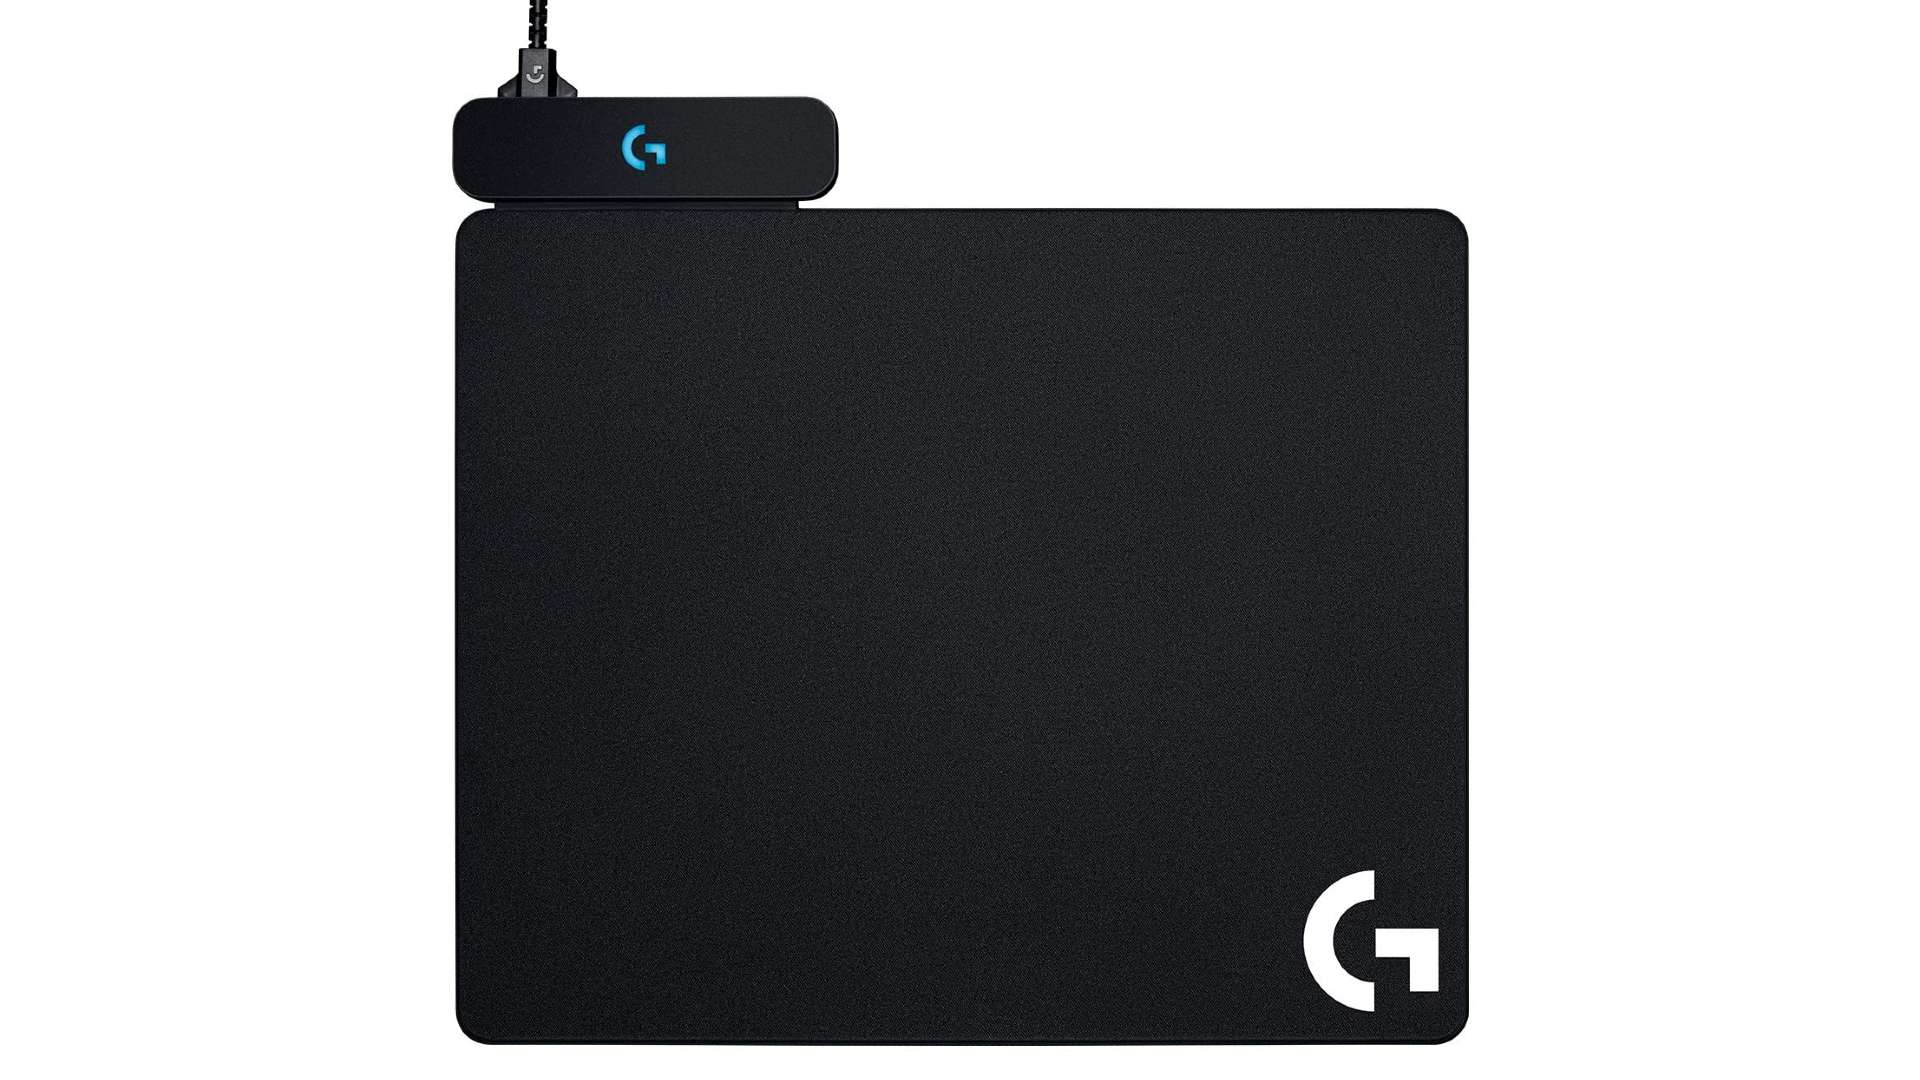 Black fabric mouse pad with wireless charging module in the top left